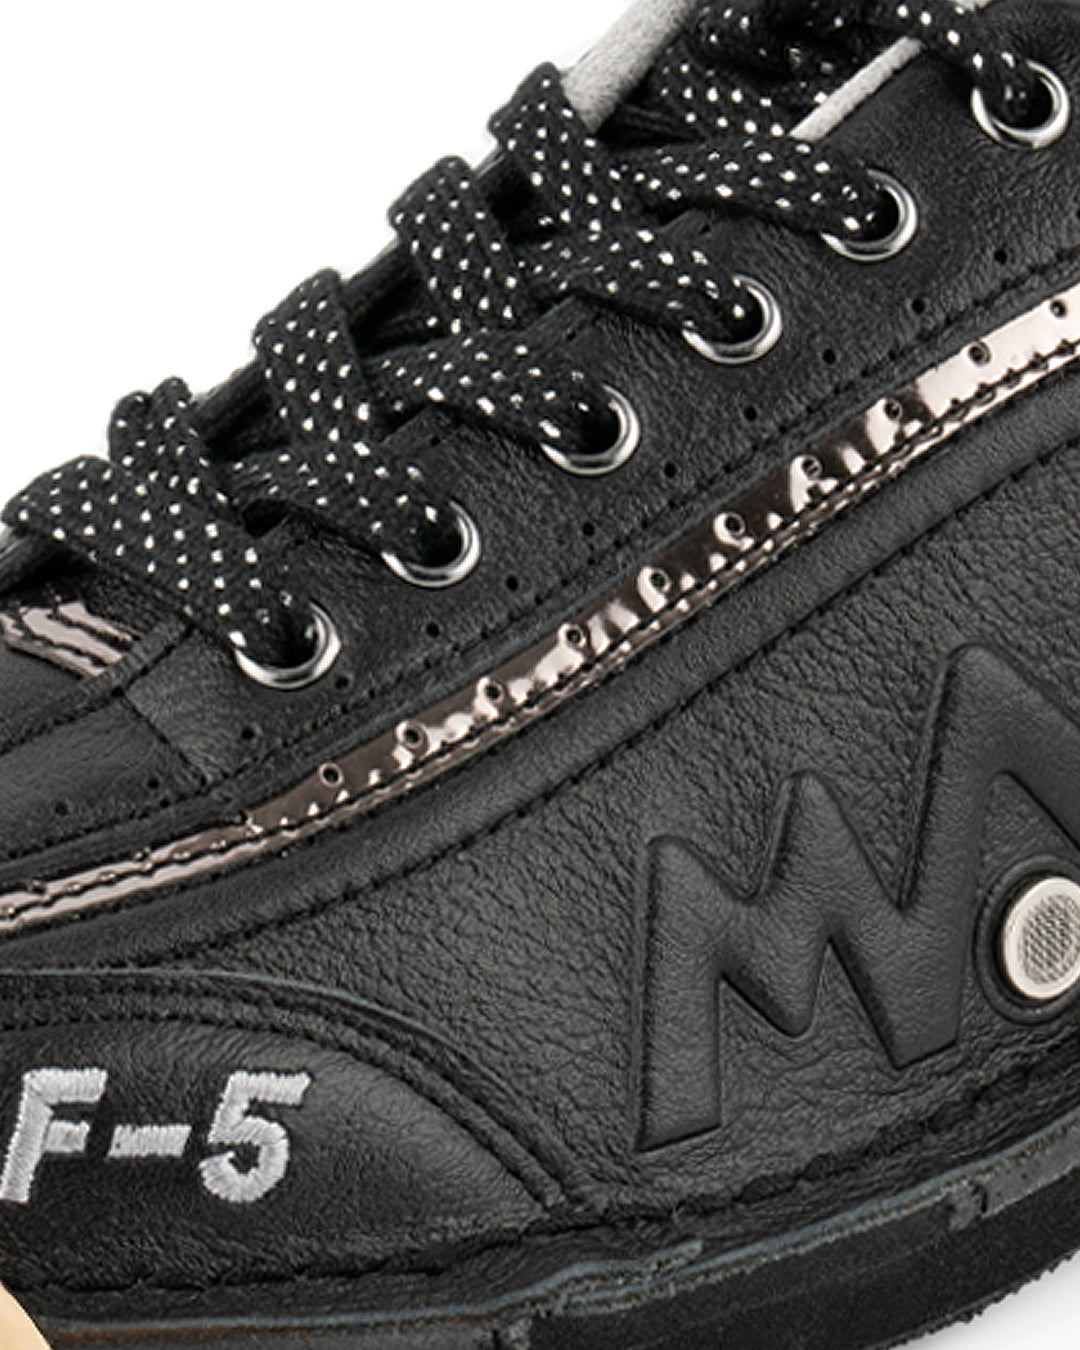 maxwelter f-5 bowling shoes black leather detail